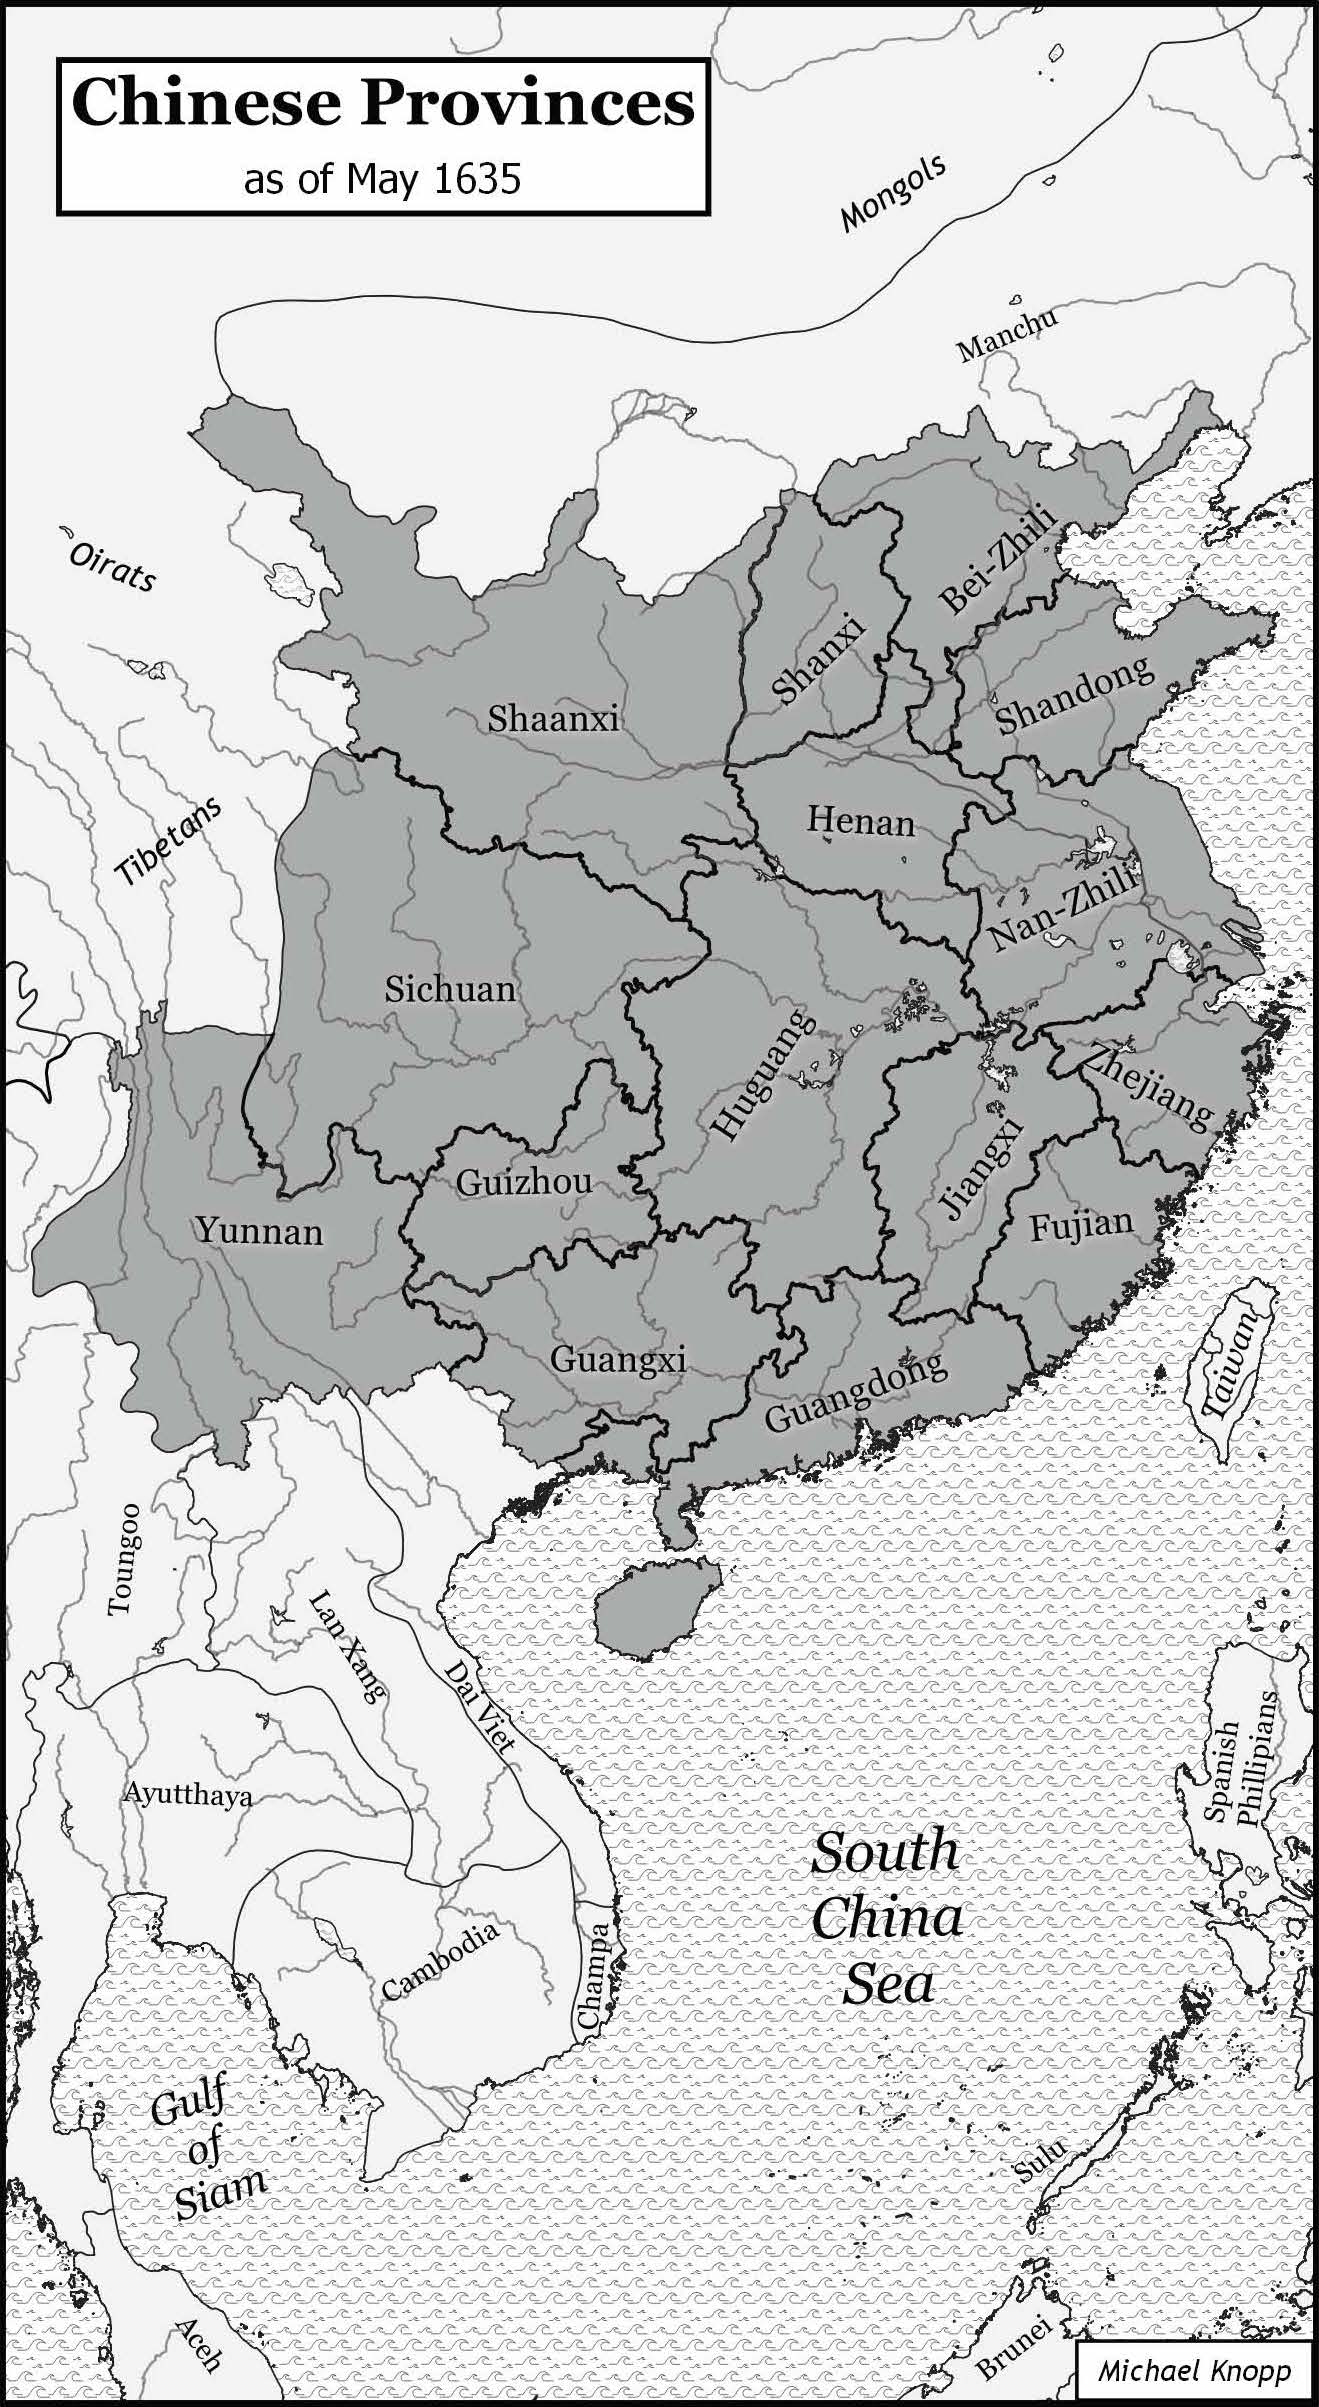 Chinese Provinces as of May 1635